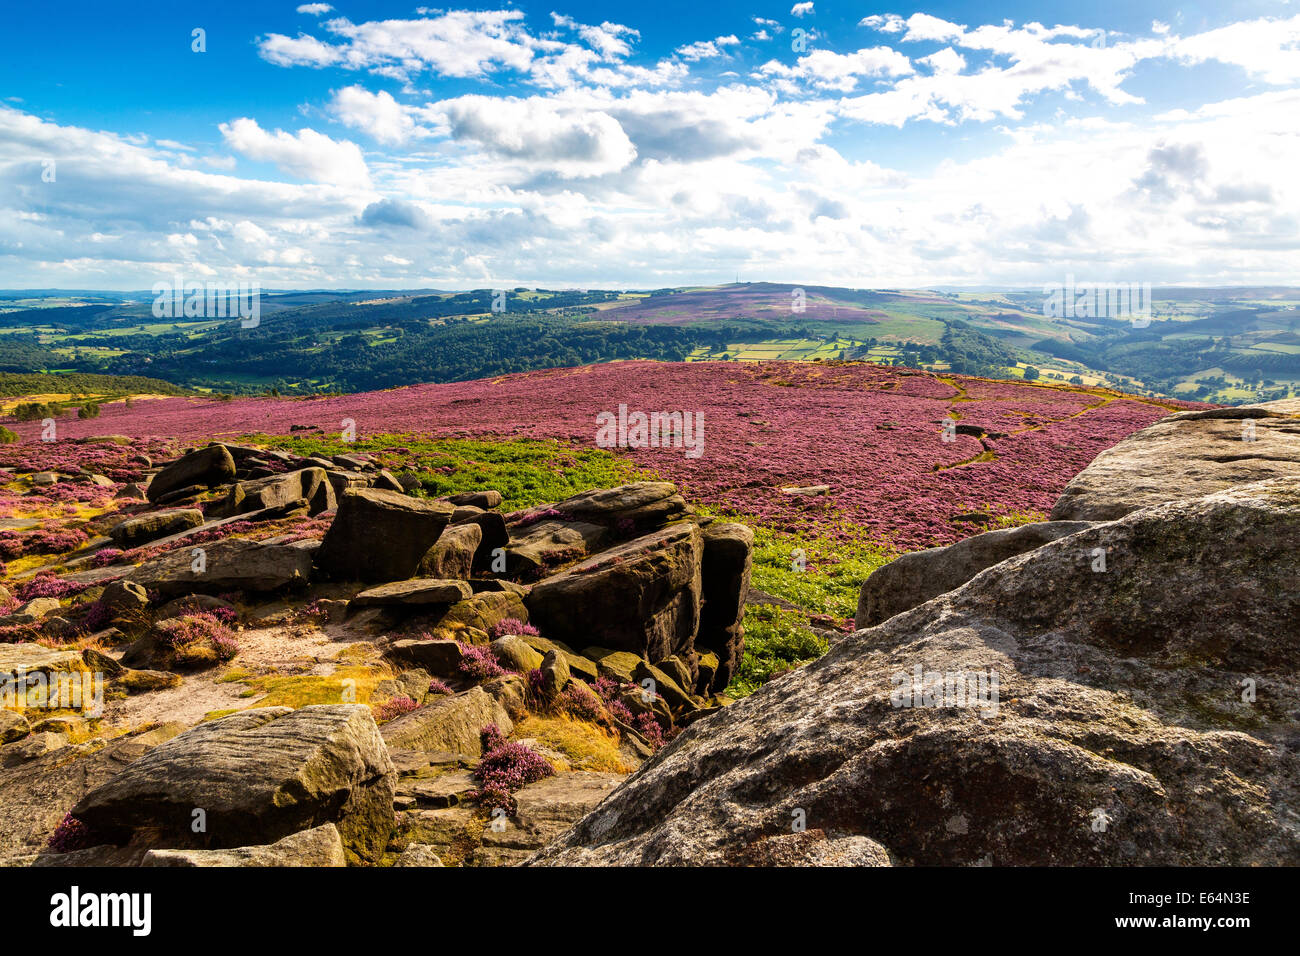 View from Hathersage Moor in Peak District National Park, Derbyshire, England, UK Stock Photo